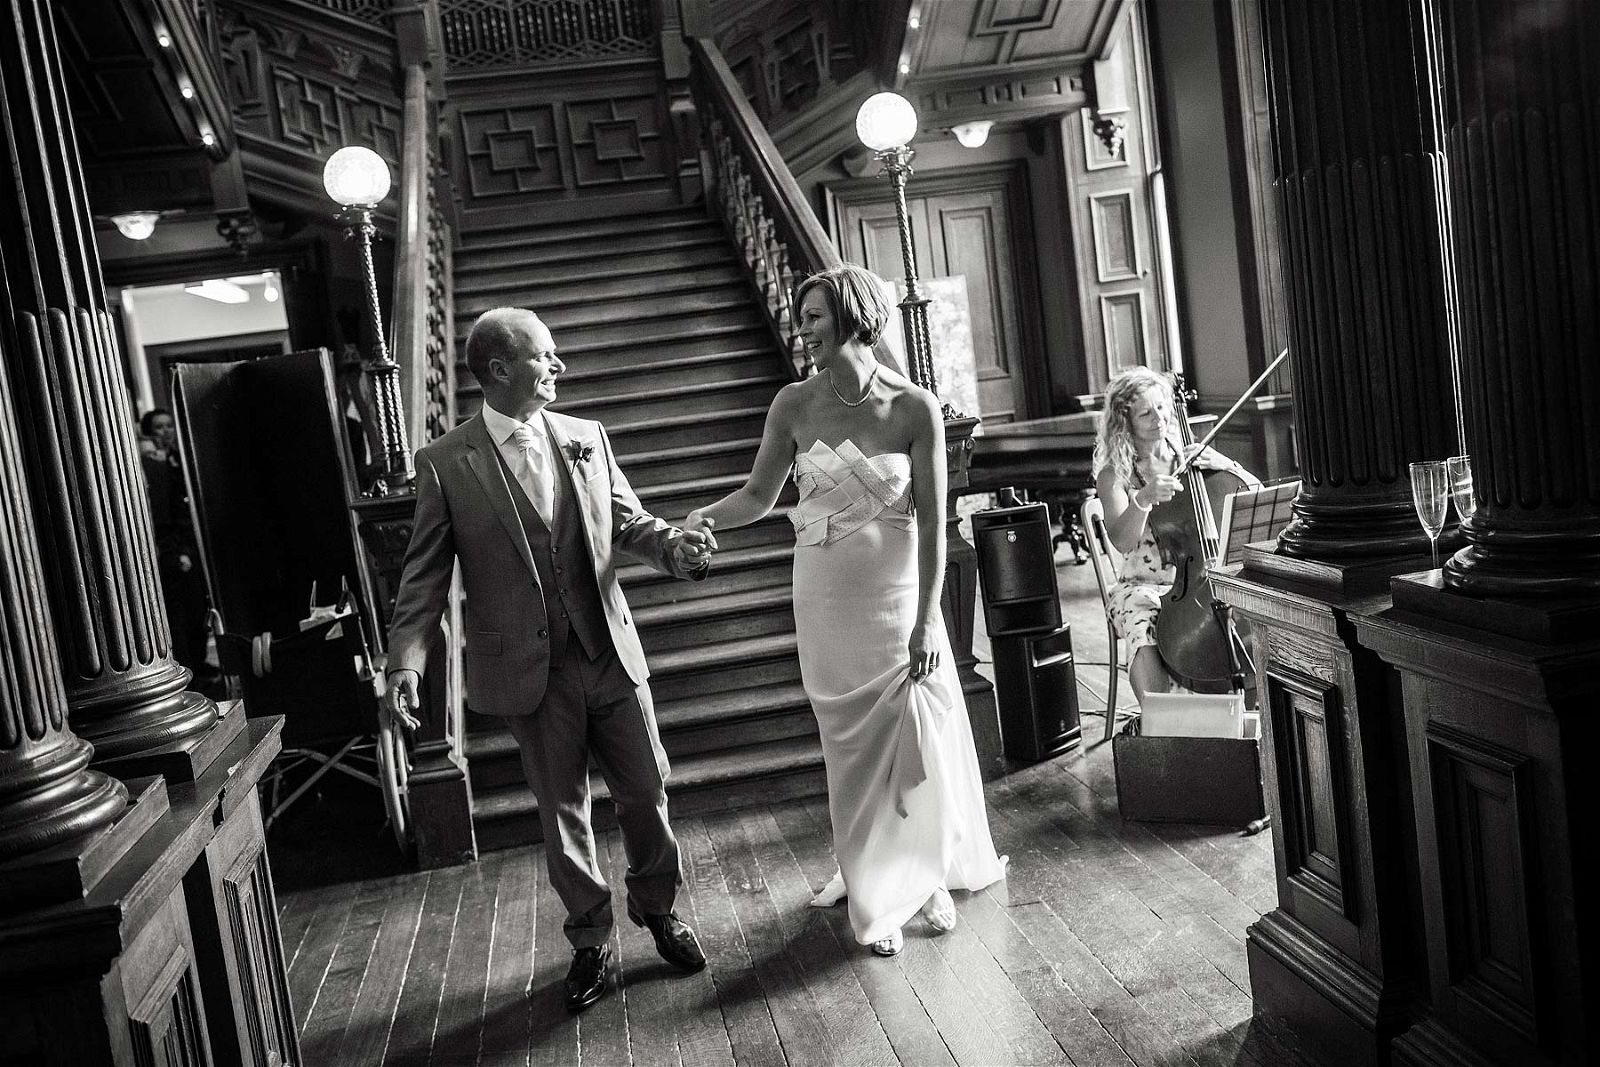 Entrance to wedding breakfast at Sandon Hall in Staffordshire by Professional Wedding Photographer Stuart James